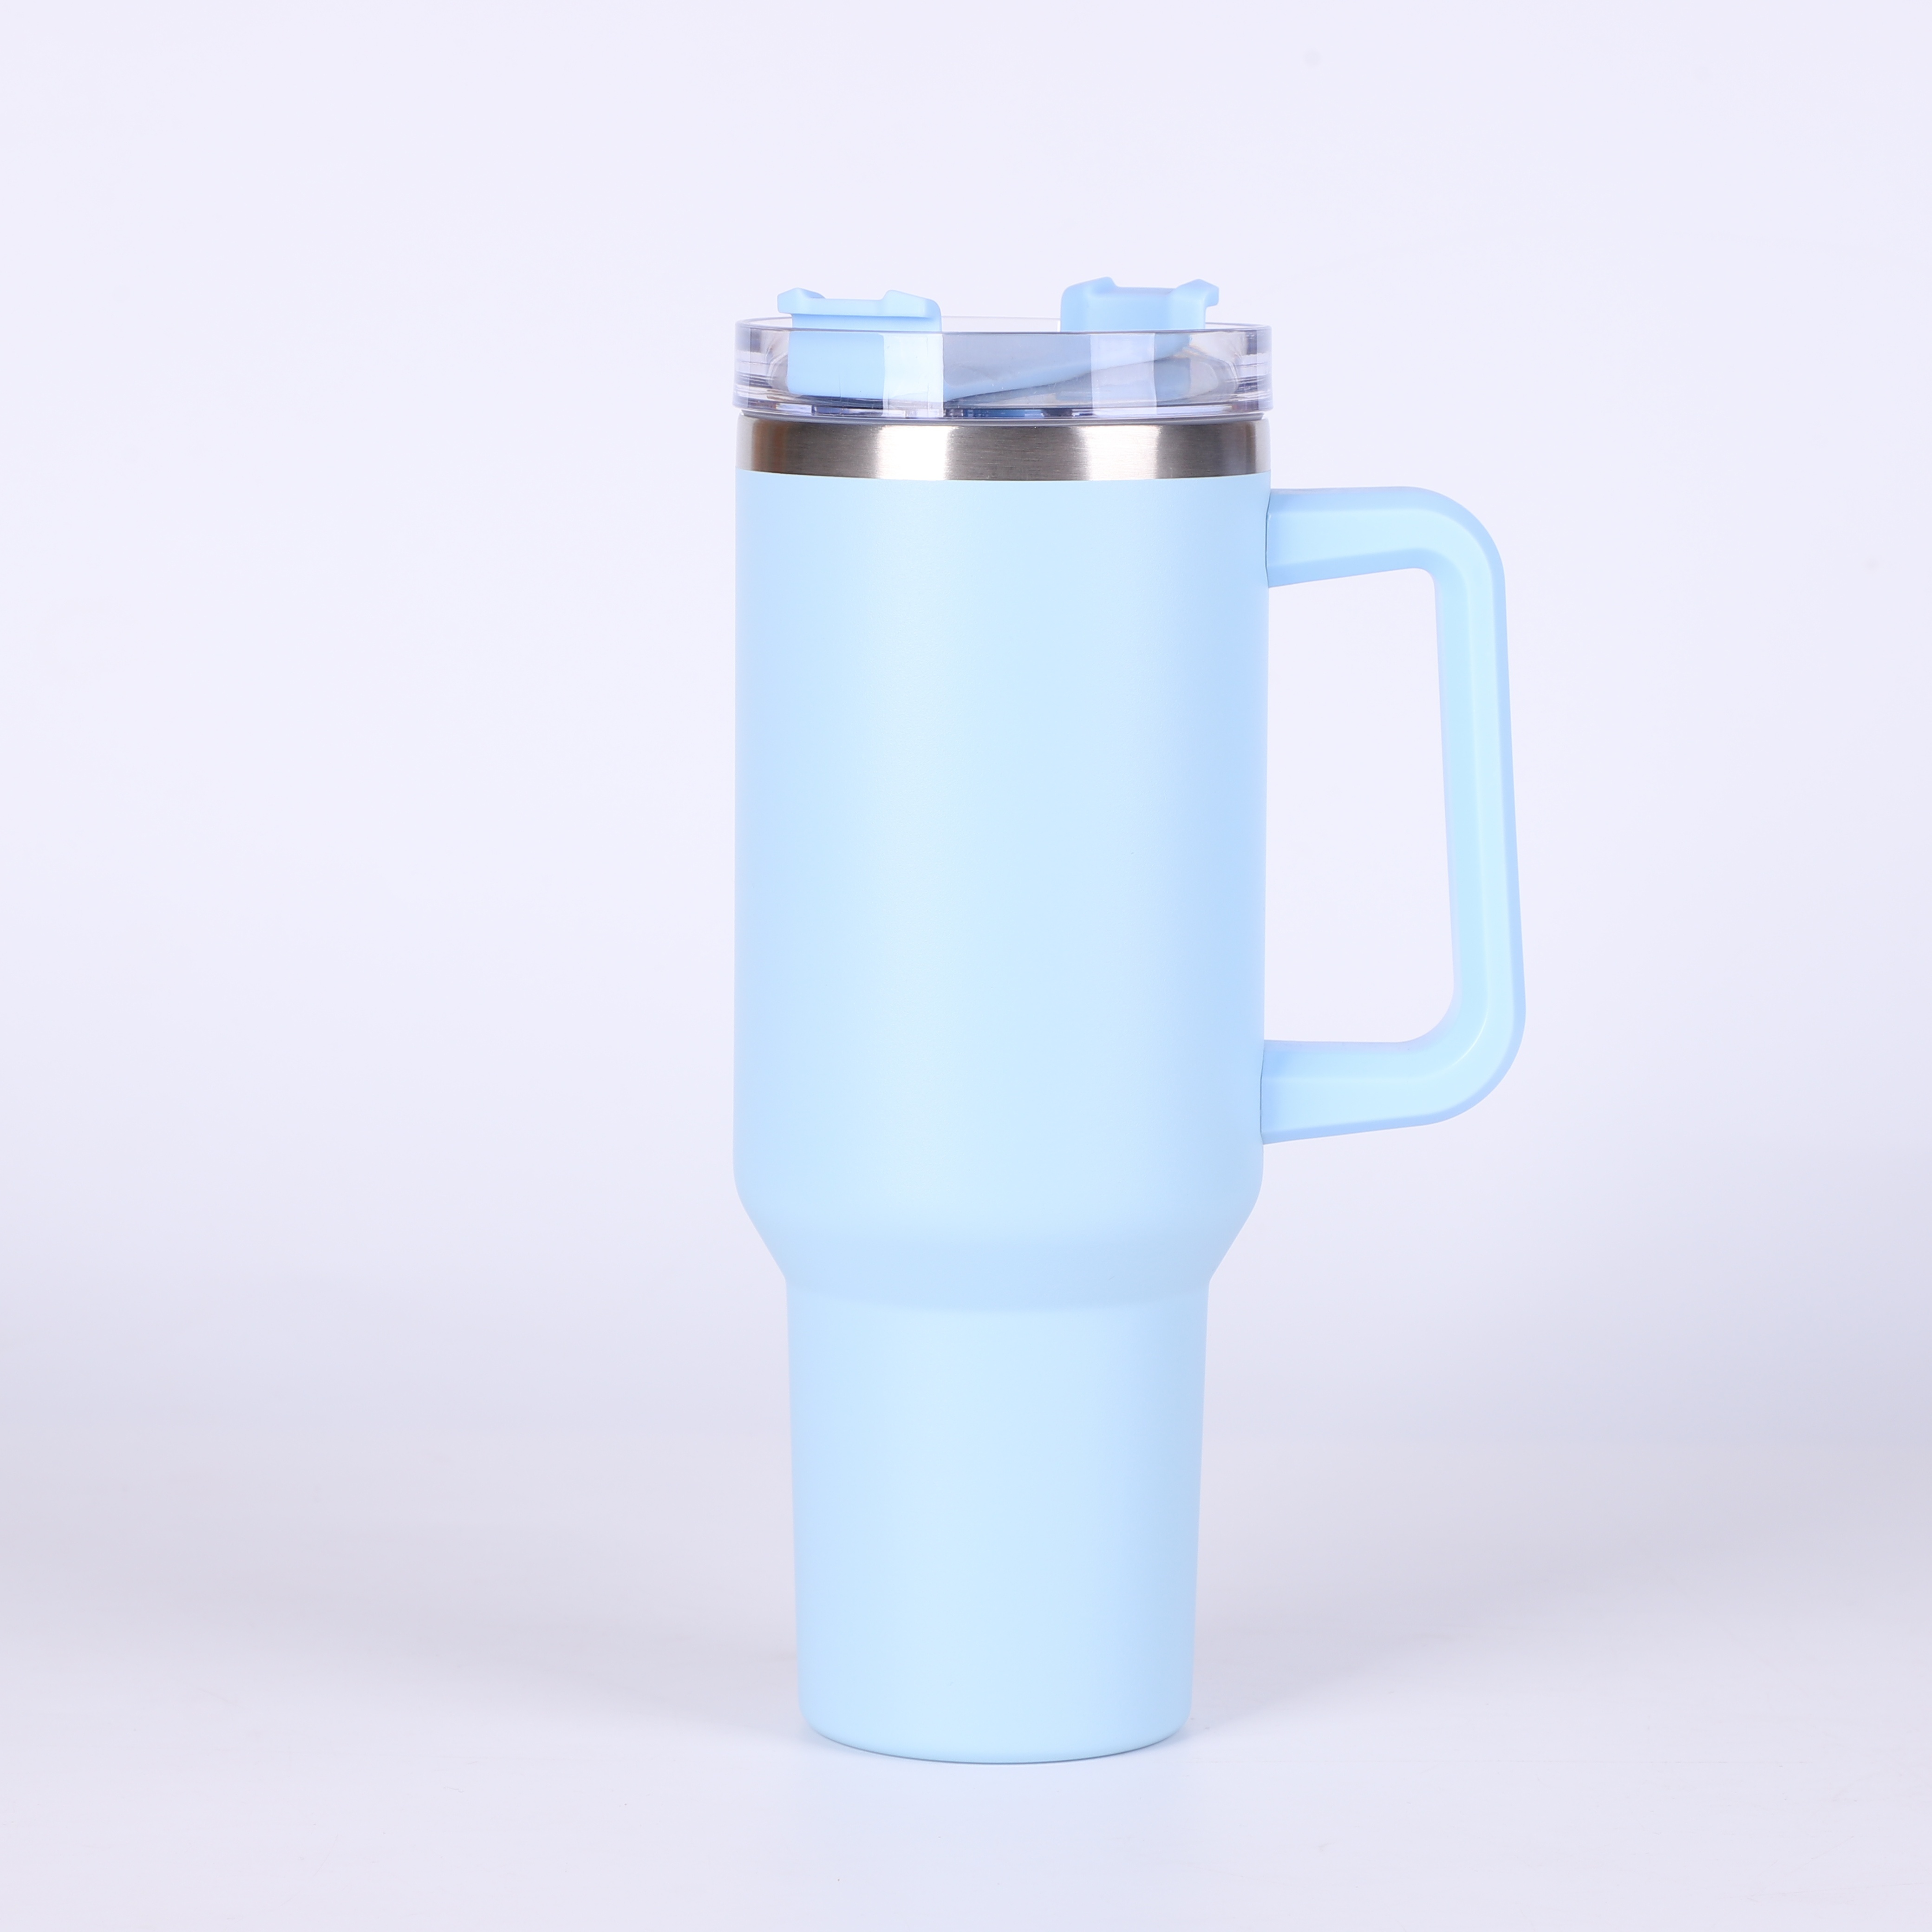 Bling Insulated Boss Mug Cup with Handle Lid 750 mL